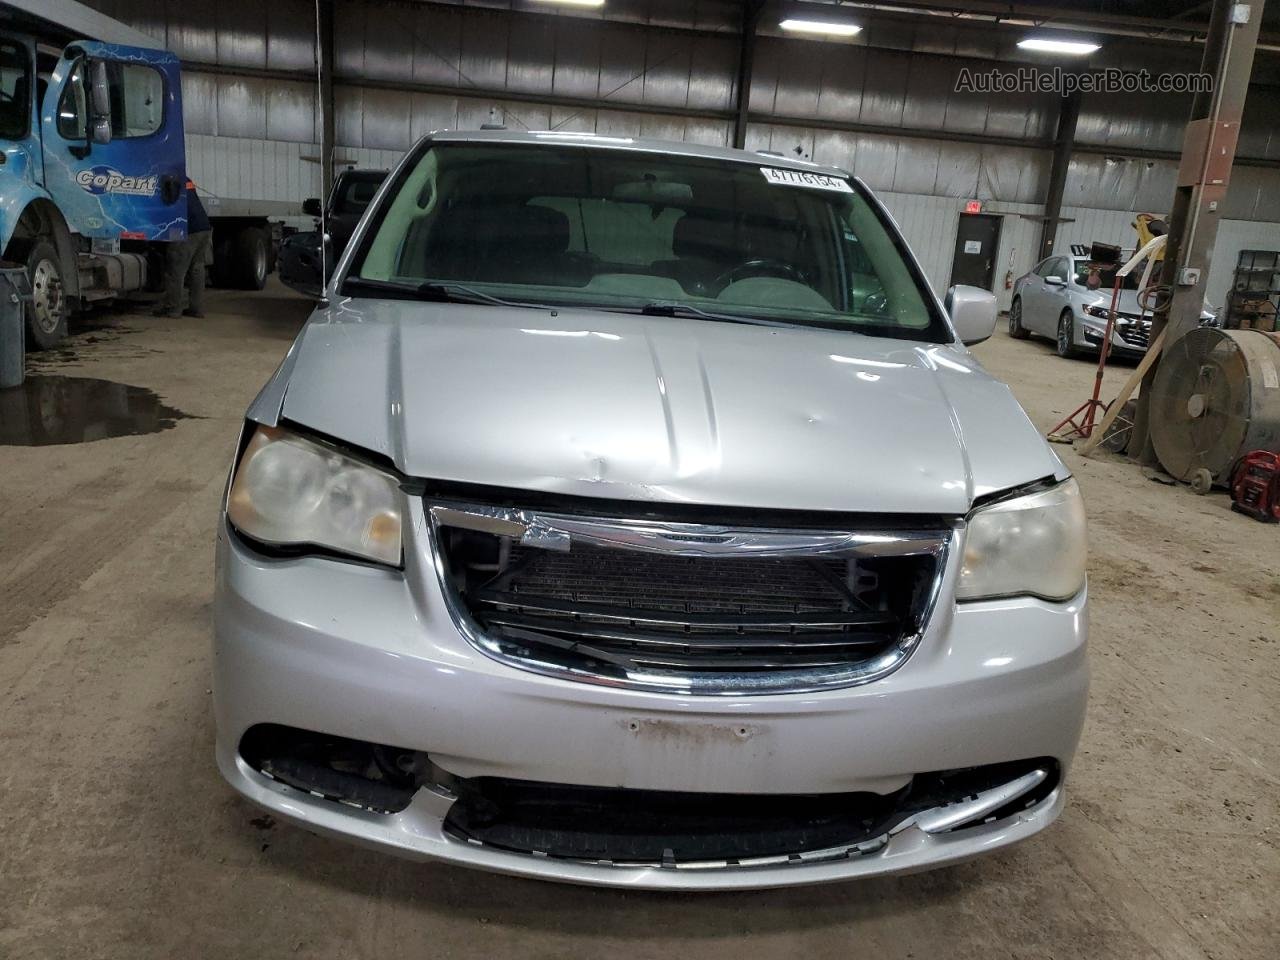 2011 Chrysler Town & Country Touring Silver vin: 2A4RR5DG2BR621423